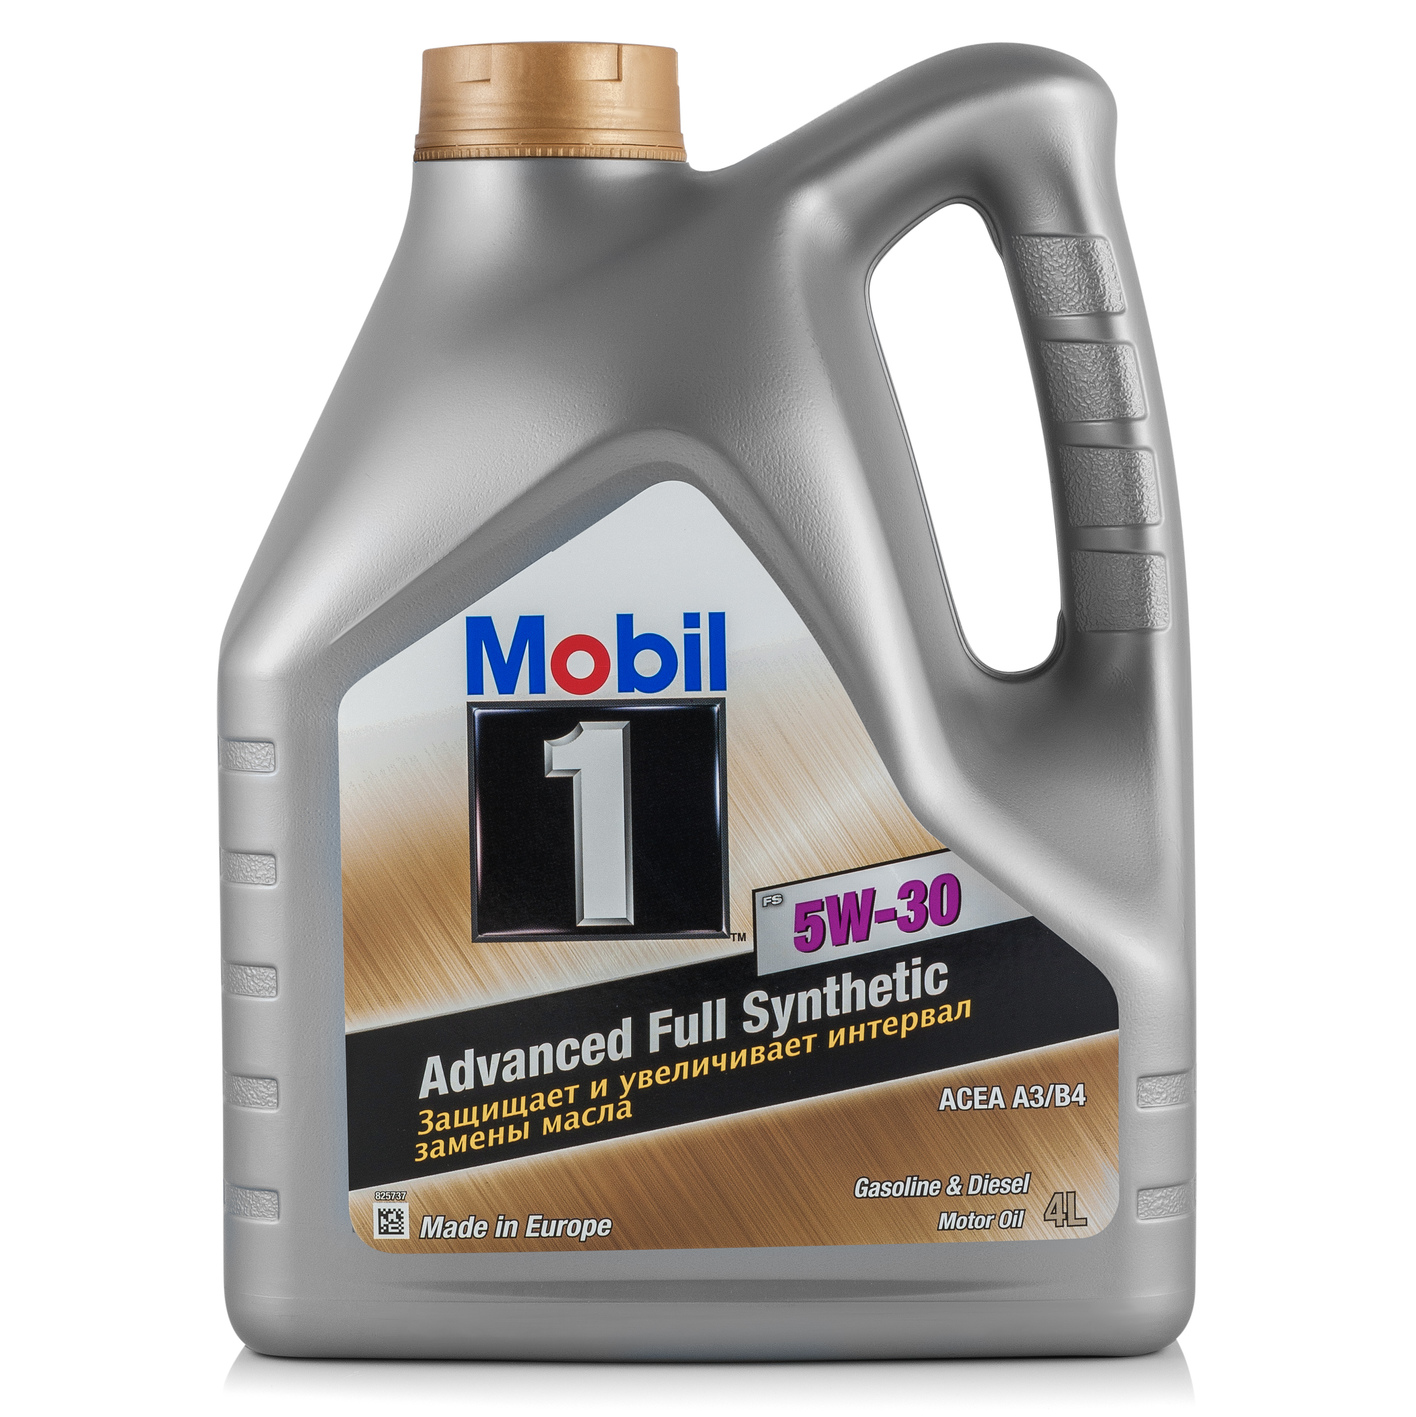 Mobil 153750 Engine oil Mobil 1 Full Synthetic 5W-30, 4L 153750